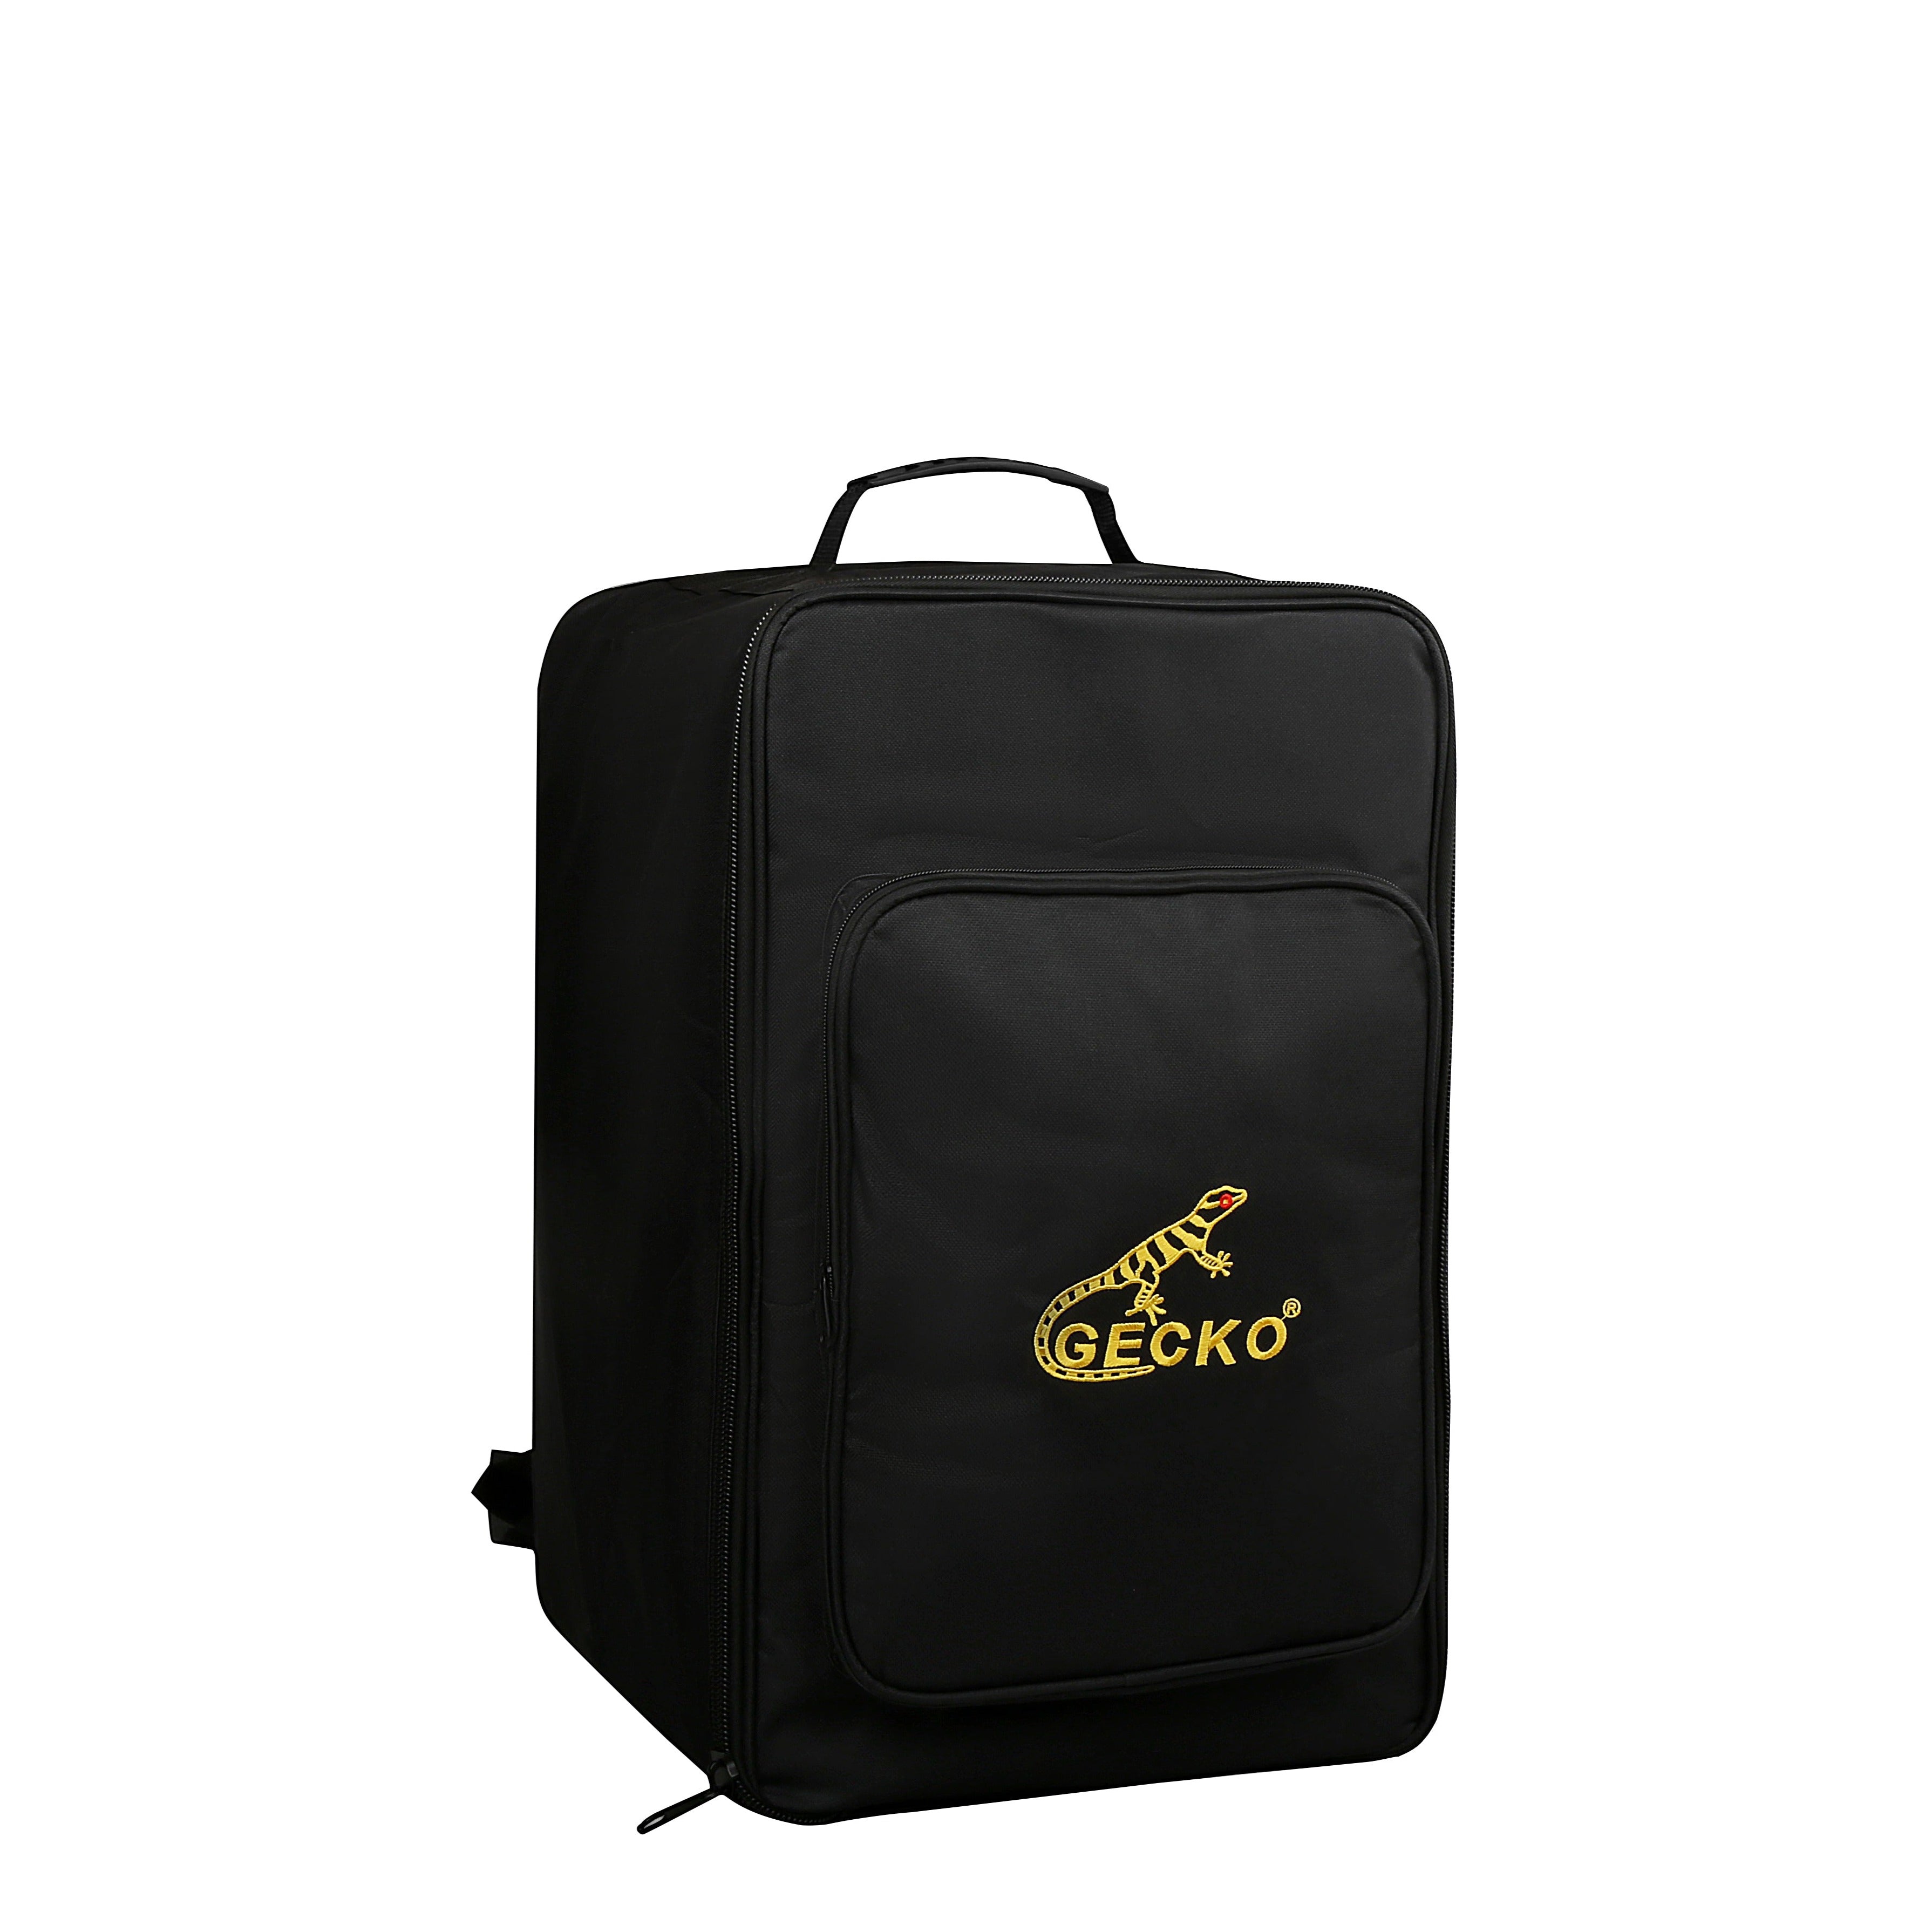 Gecko Cajon Drum Jumbo Bass Hand Percussion with Backpack Bag box drum snare cajon Wooden Percussion Box, with Internal Guitar Strings